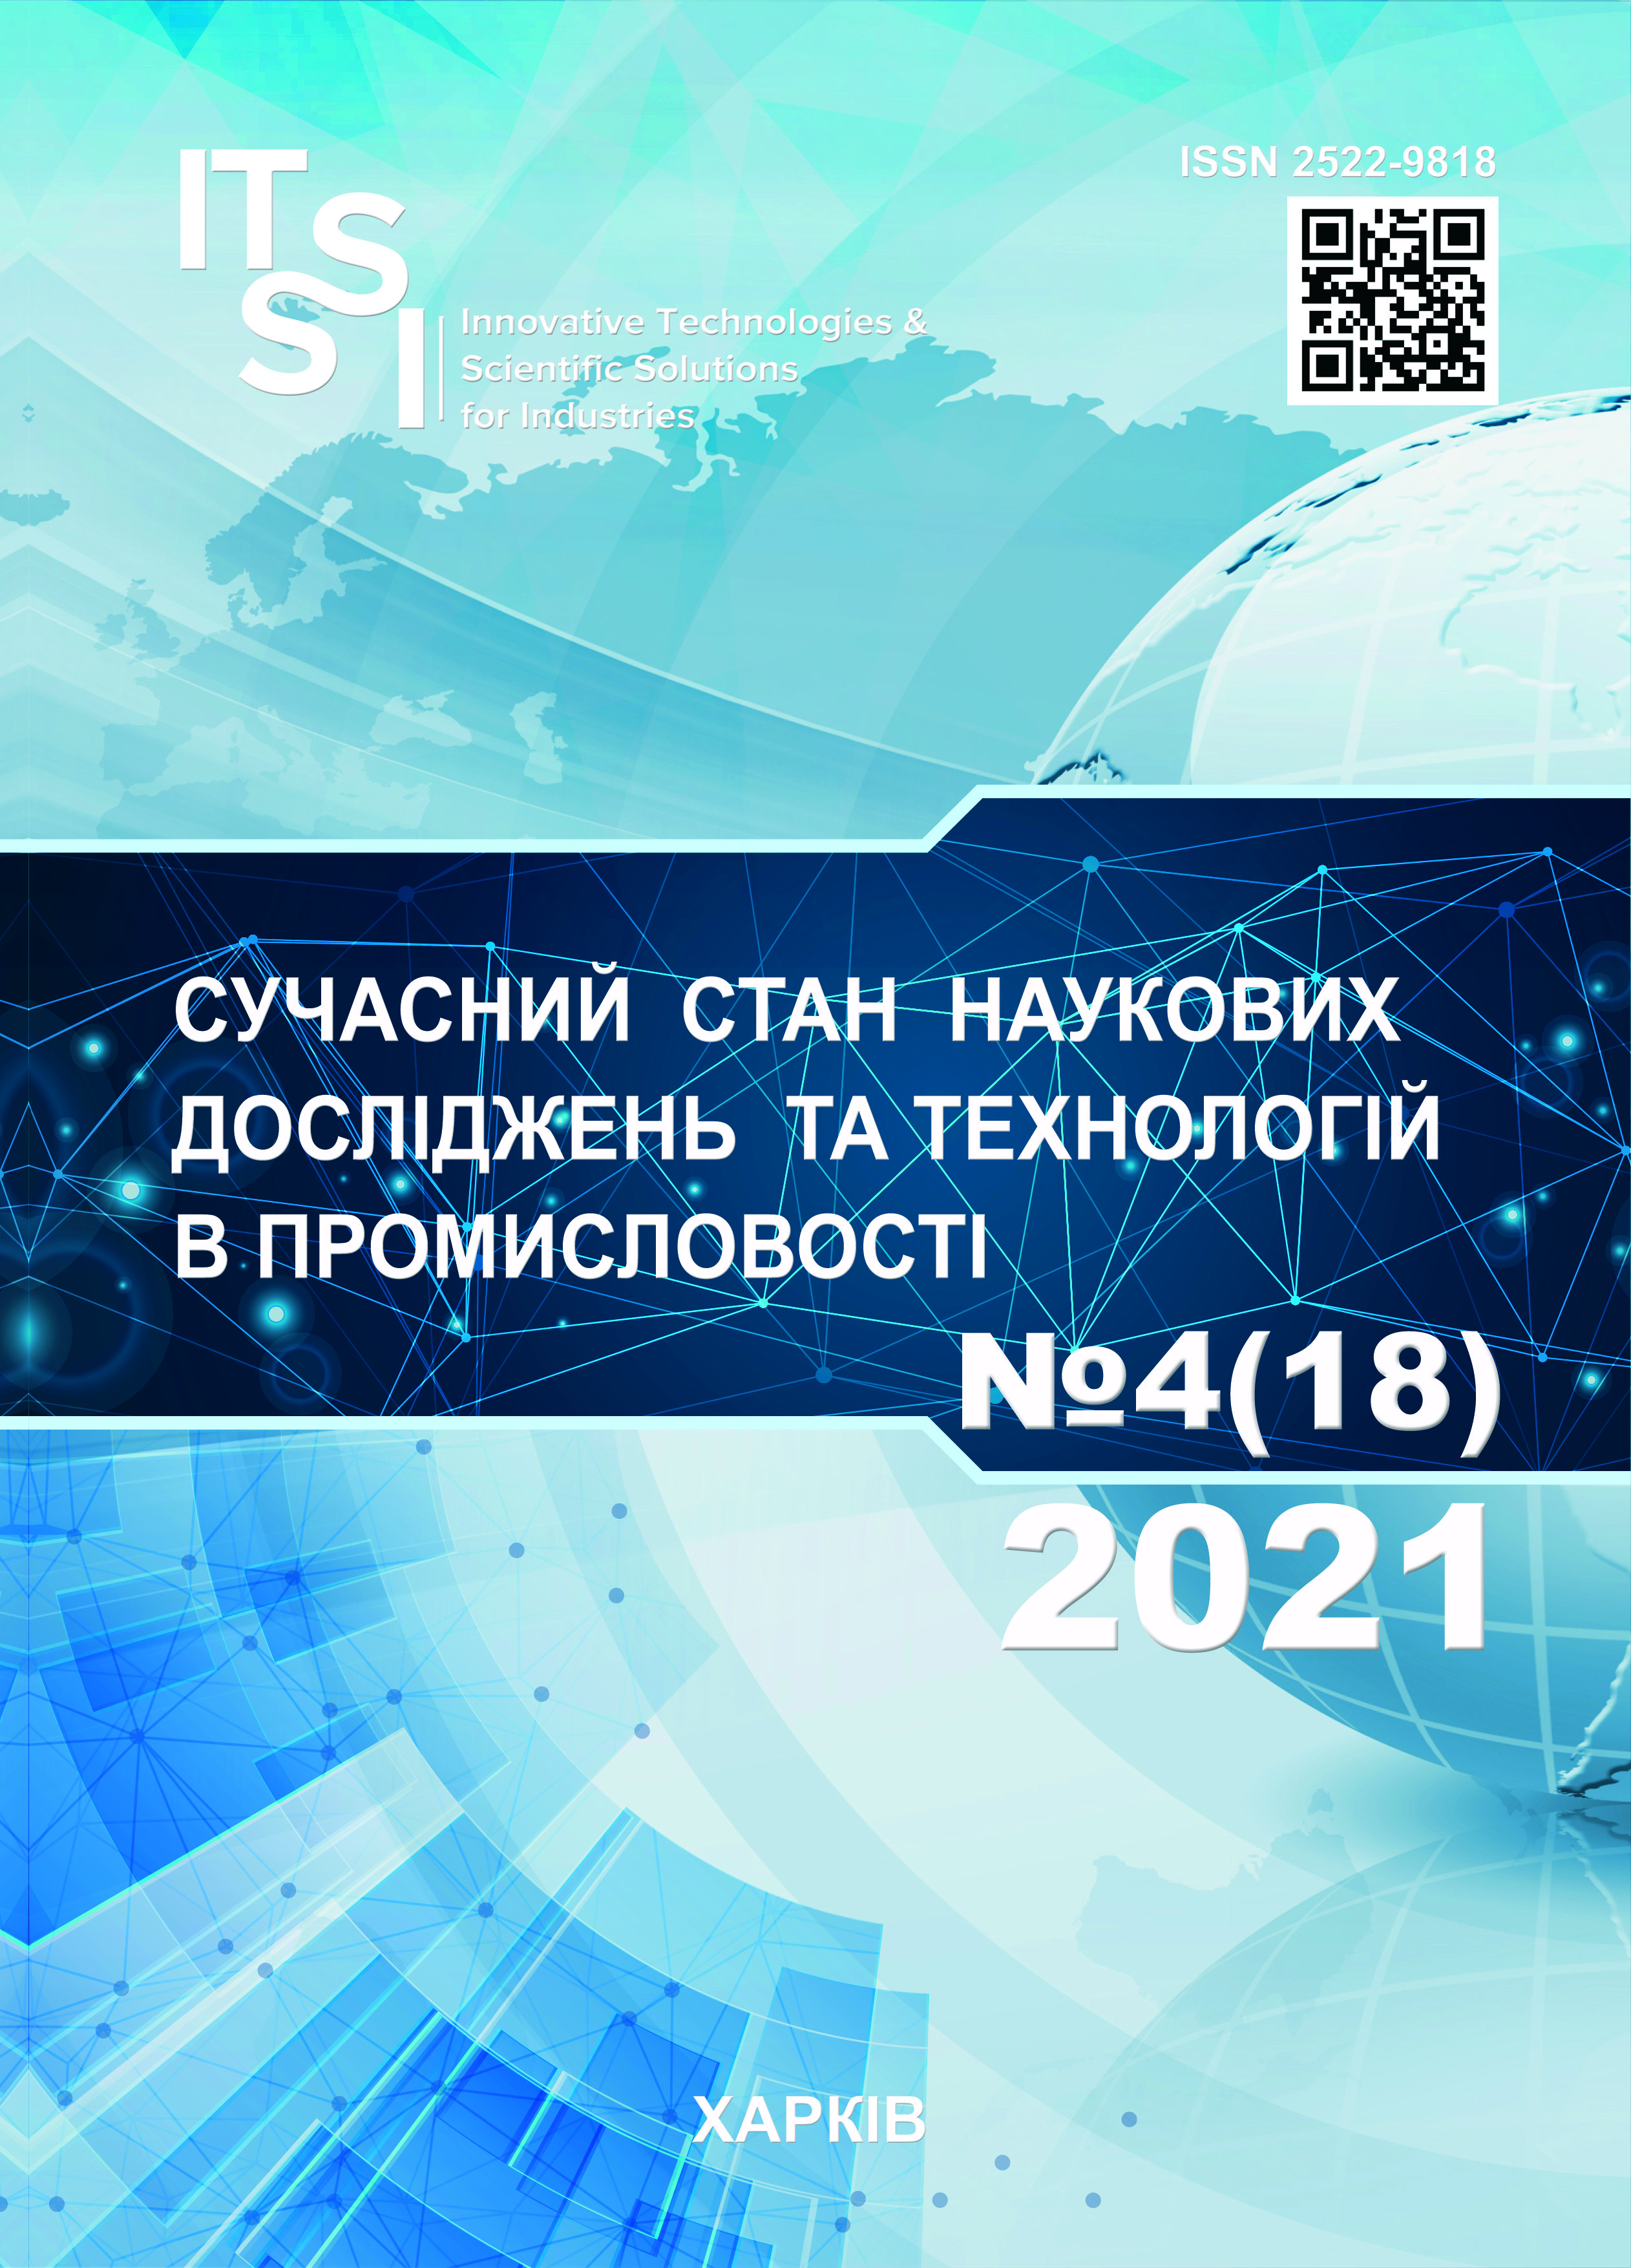 					View No. 4 (18) (2021): INNOVATIVE  TECHNOLOGIES  AND  SCIENTIFIC SOLUTIONS FOR INDUSTRIES
				